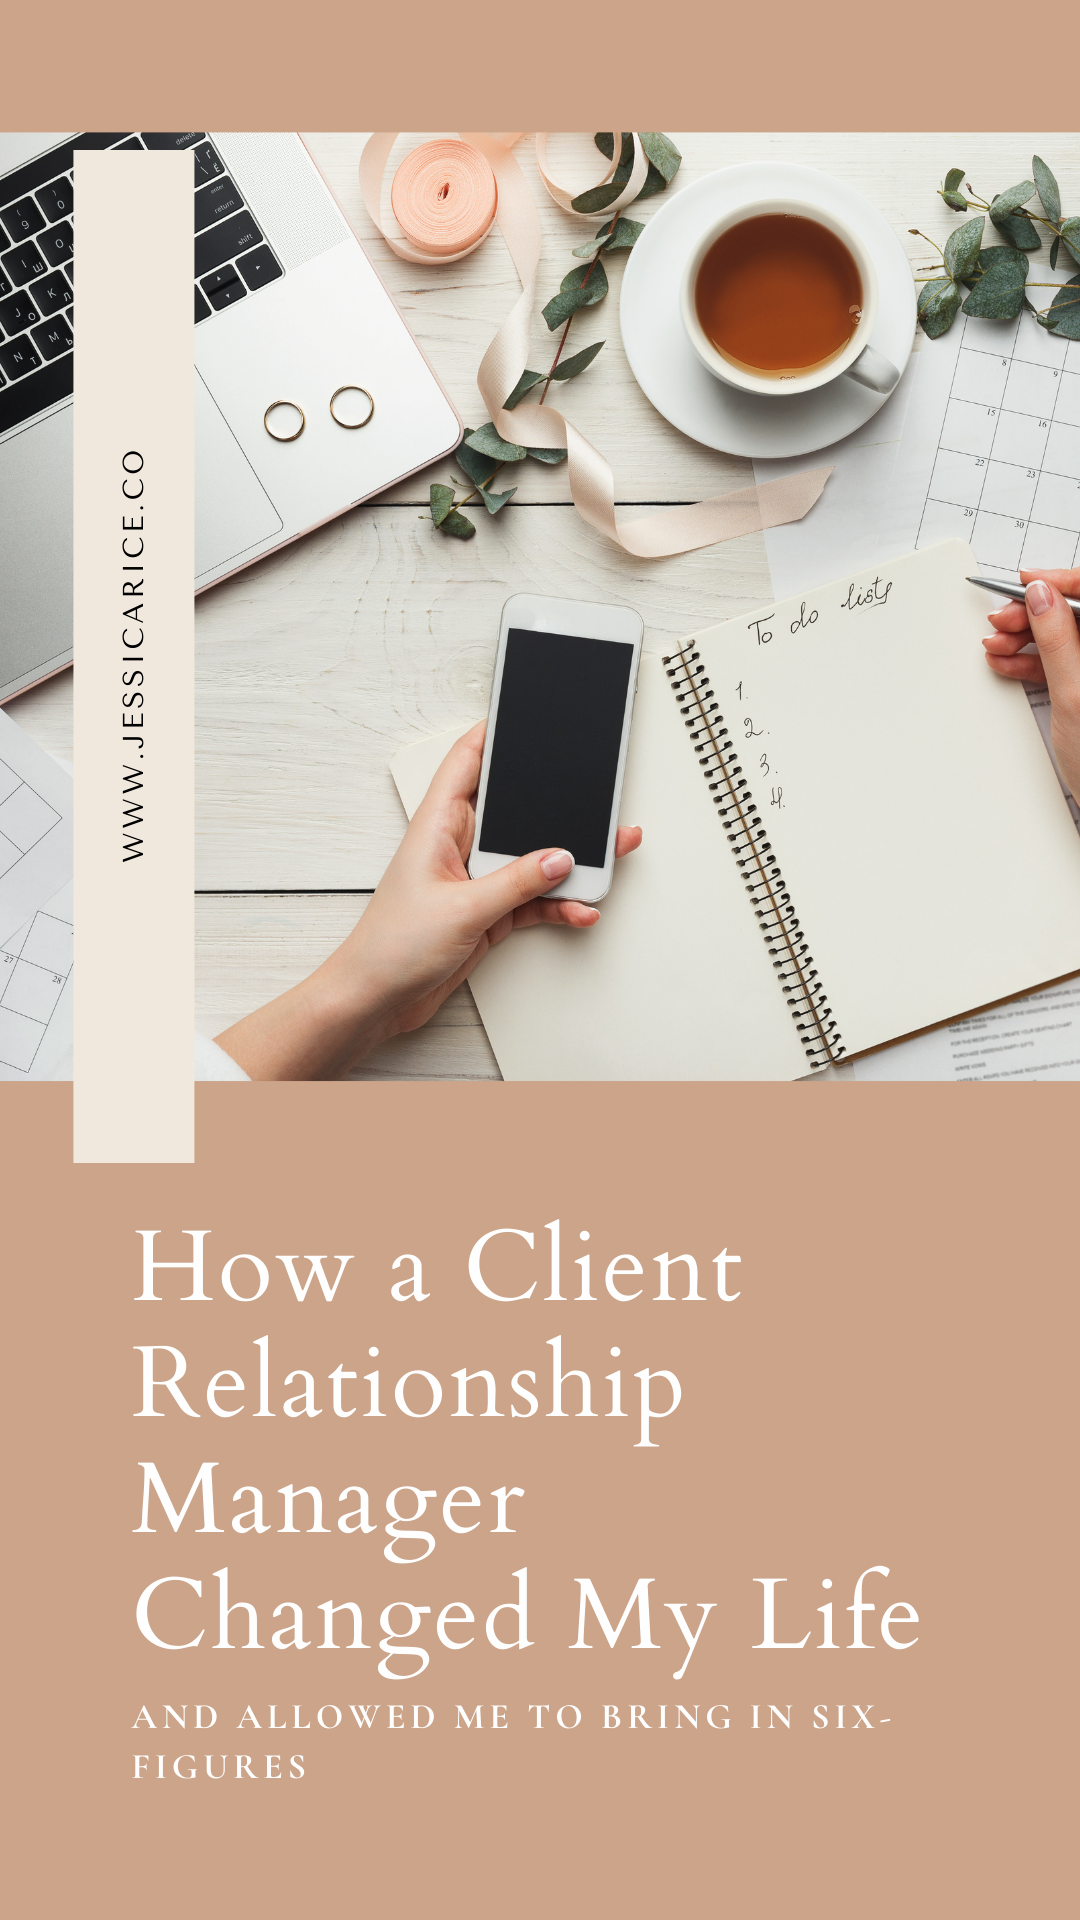 Learn how to scale your business by using a Client Relationship Manager system